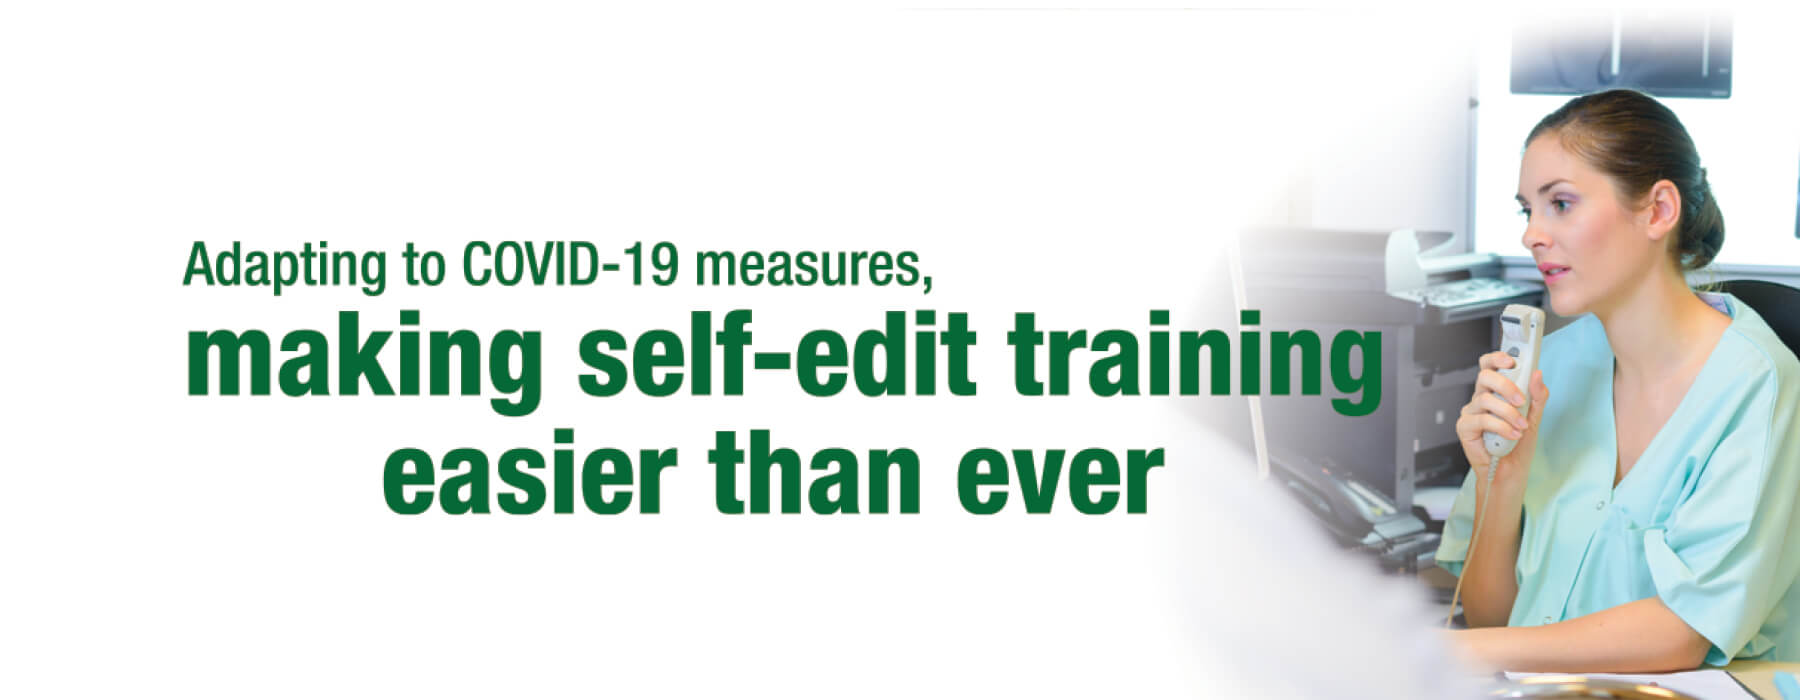 Self-edit team adapts to COVID-19 measures, makes training for physicians easier than ever